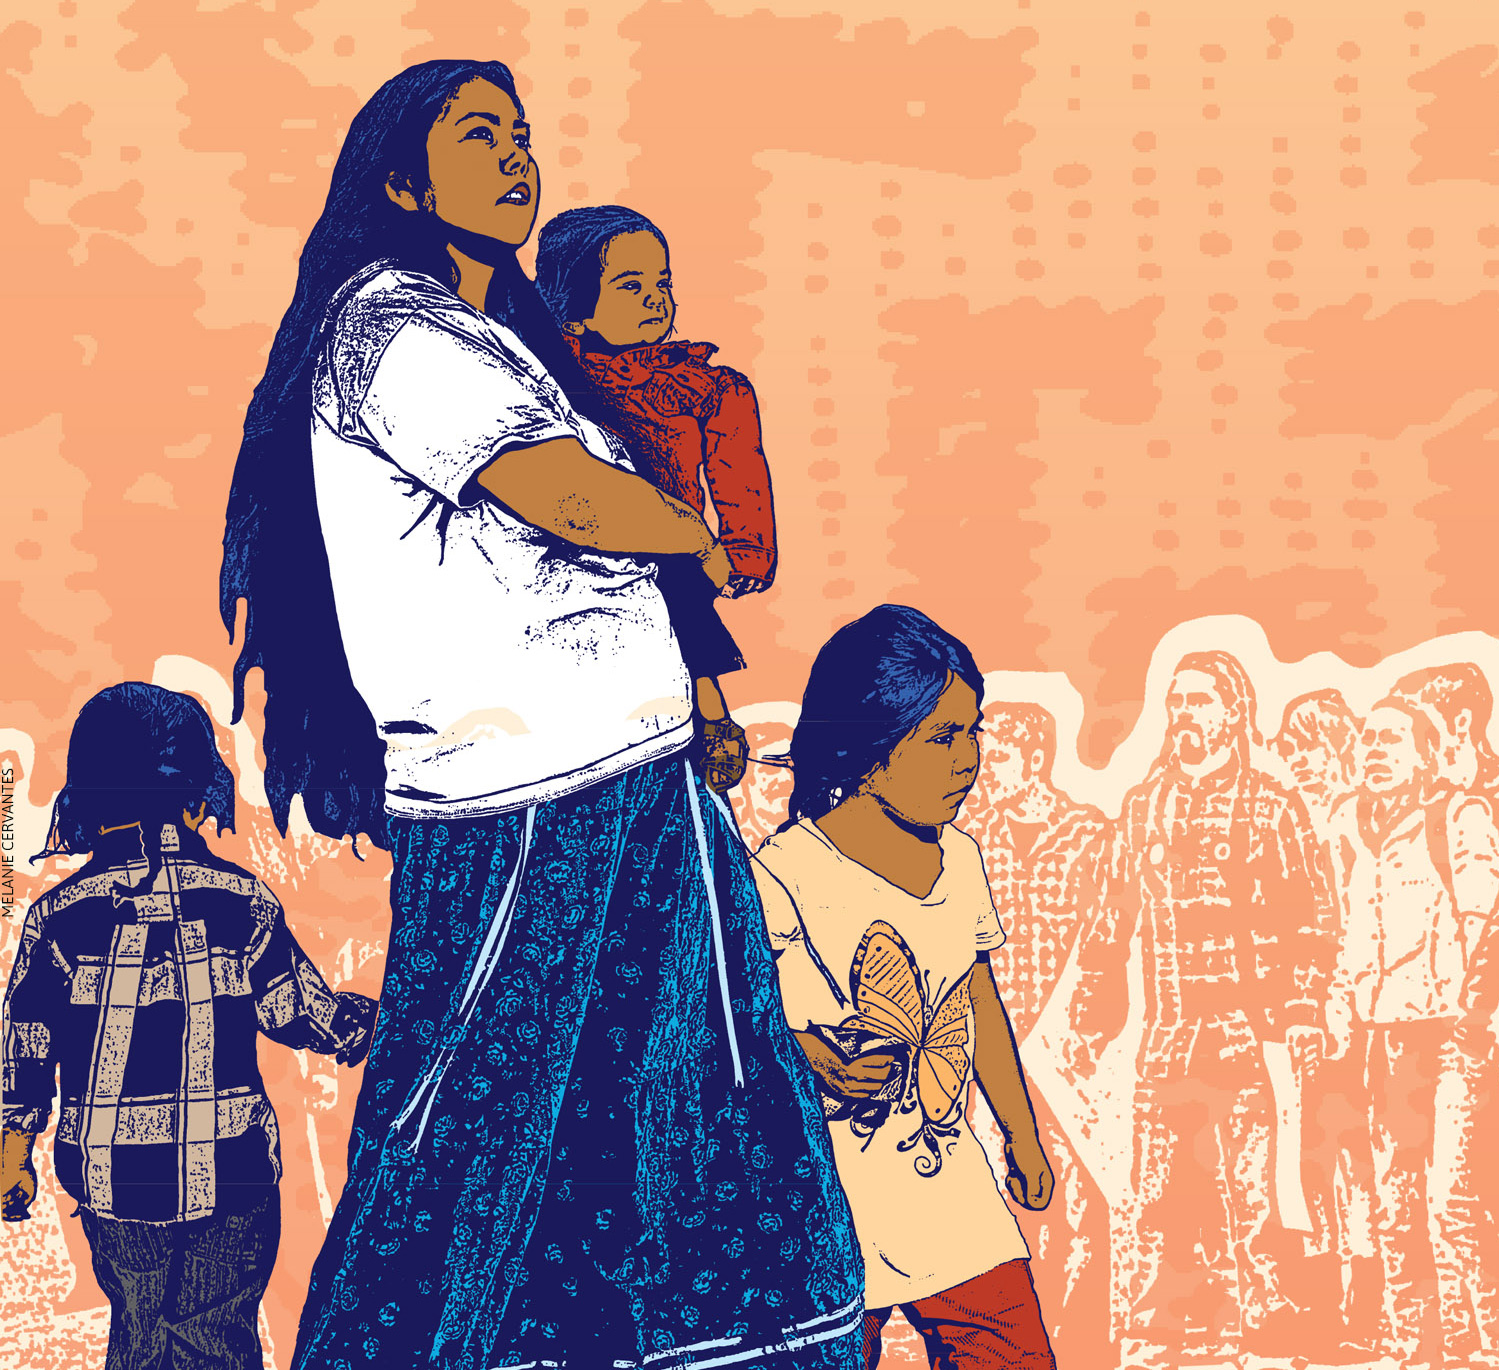 Illustration of an Indigenous mother, striding forward with her three young children. In the background is a Round Dance and a geometric basket pattern. Artist: Melanie Cervantes